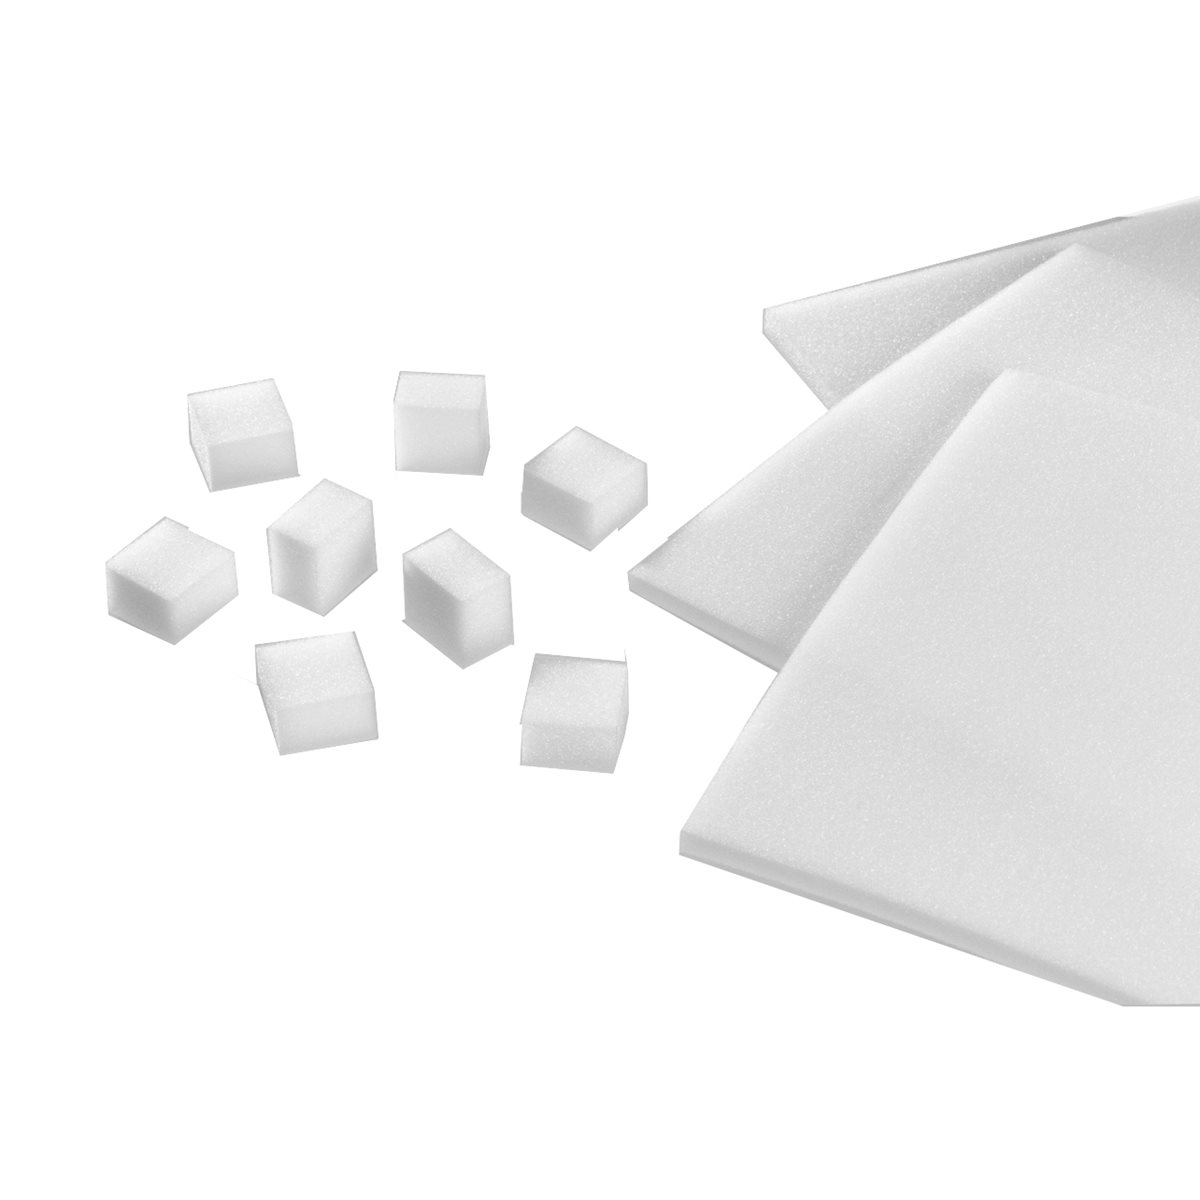 Foam Cubes and Sheets Image